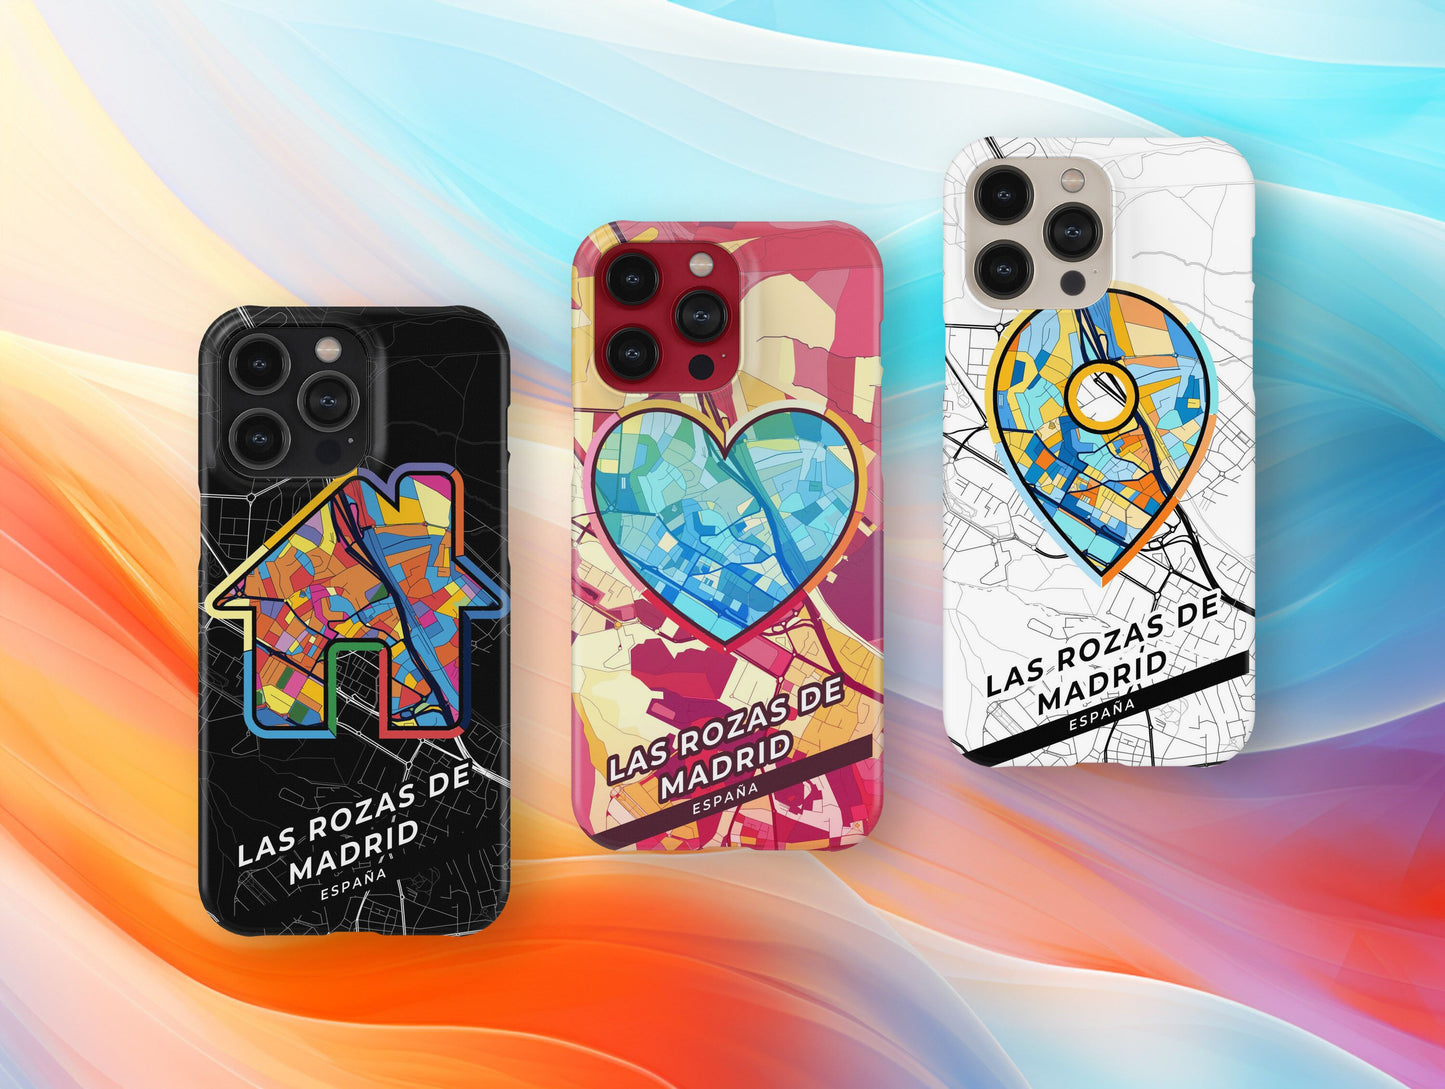 Las Rozas De Madrid Spain slim phone case with colorful icon. Birthday, wedding or housewarming gift. Couple match cases.